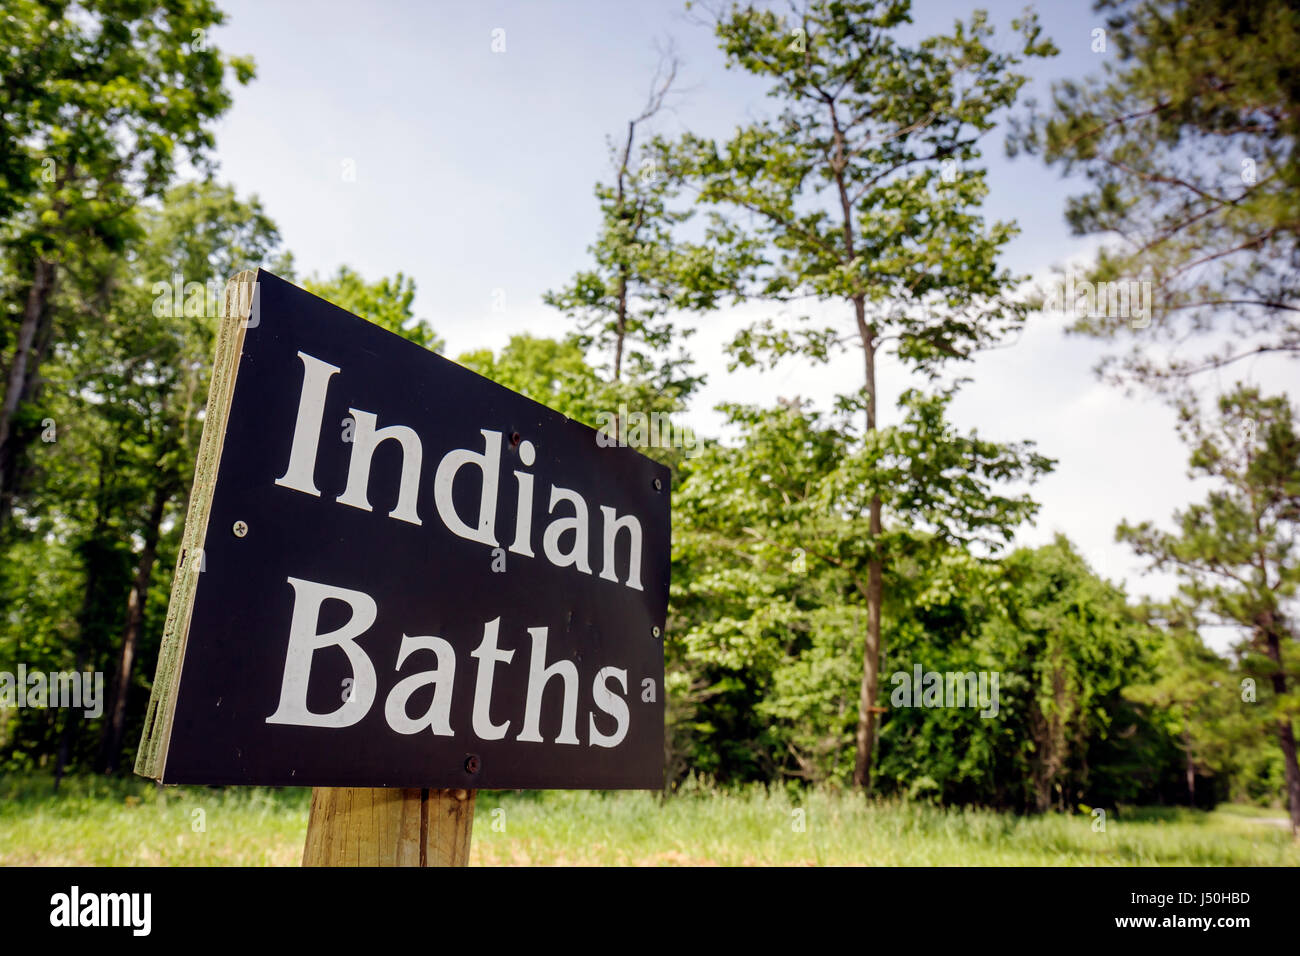 Alabama,St. Stephens,St. Stephens historic Site,Indian Baths,scenic trail,outdoor,sign,archeology,natural history,AL080514045 Stock Photo